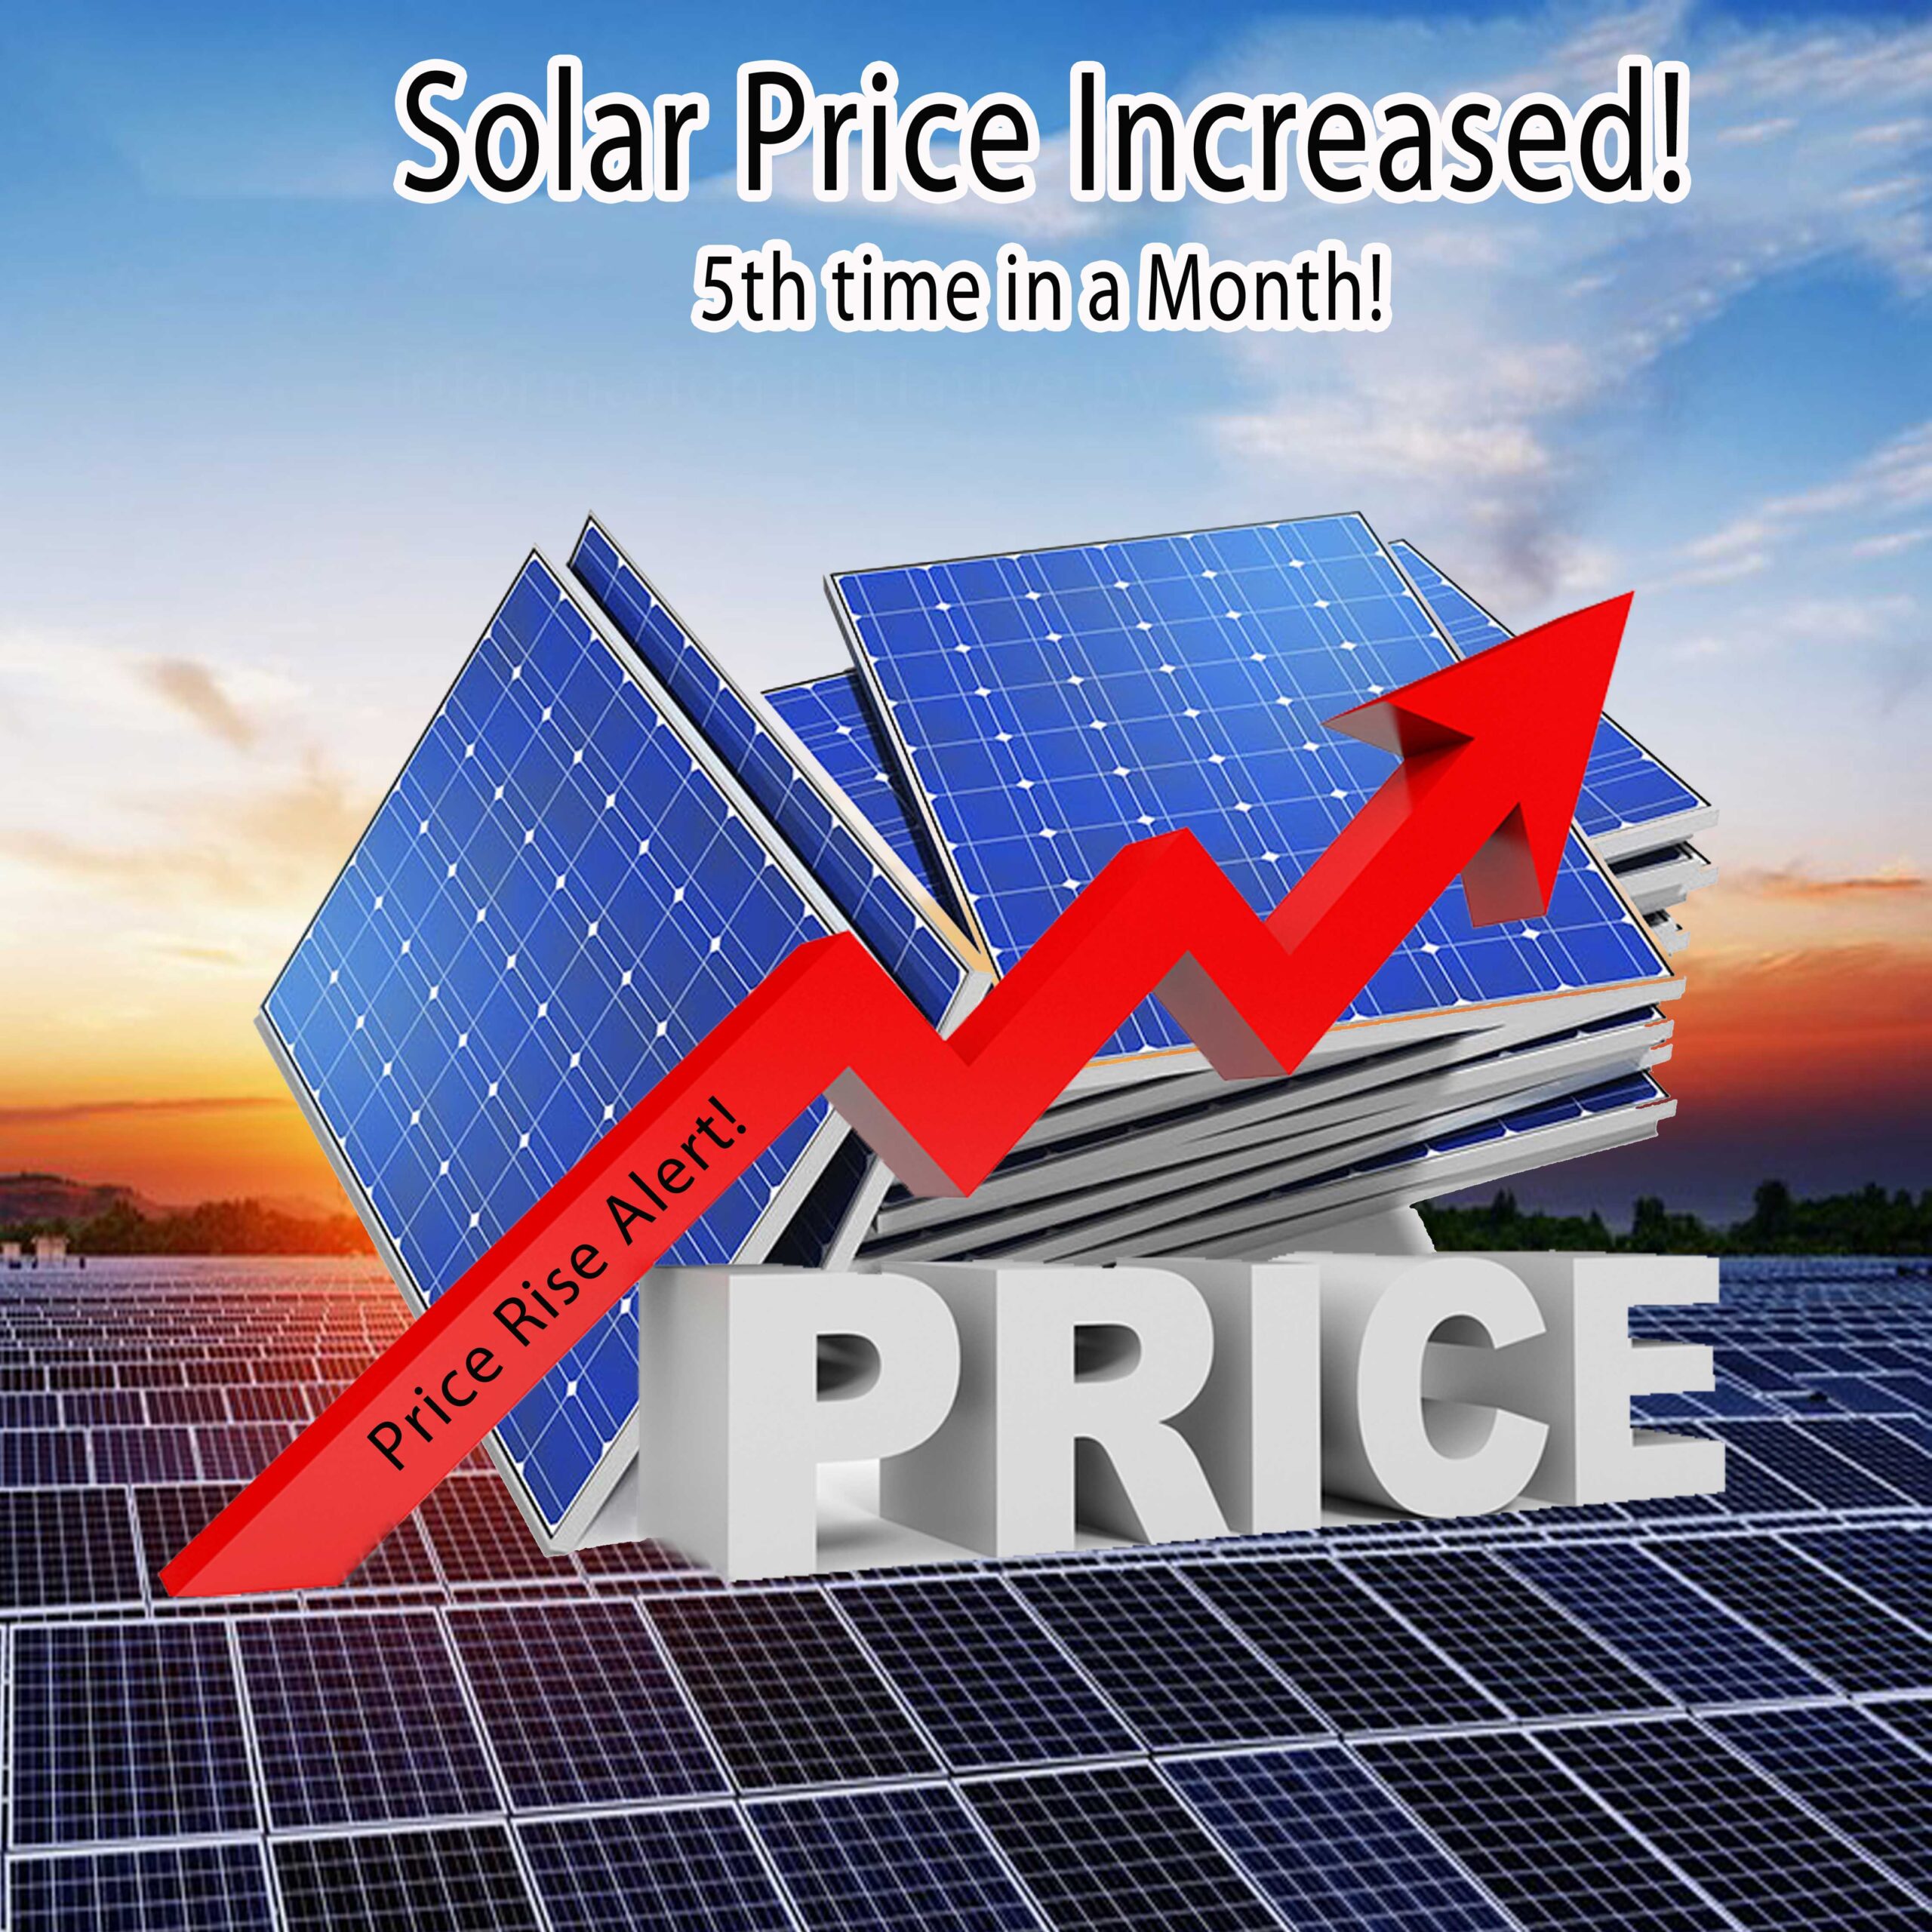 Why the Prices of Solar Systems are increasing?